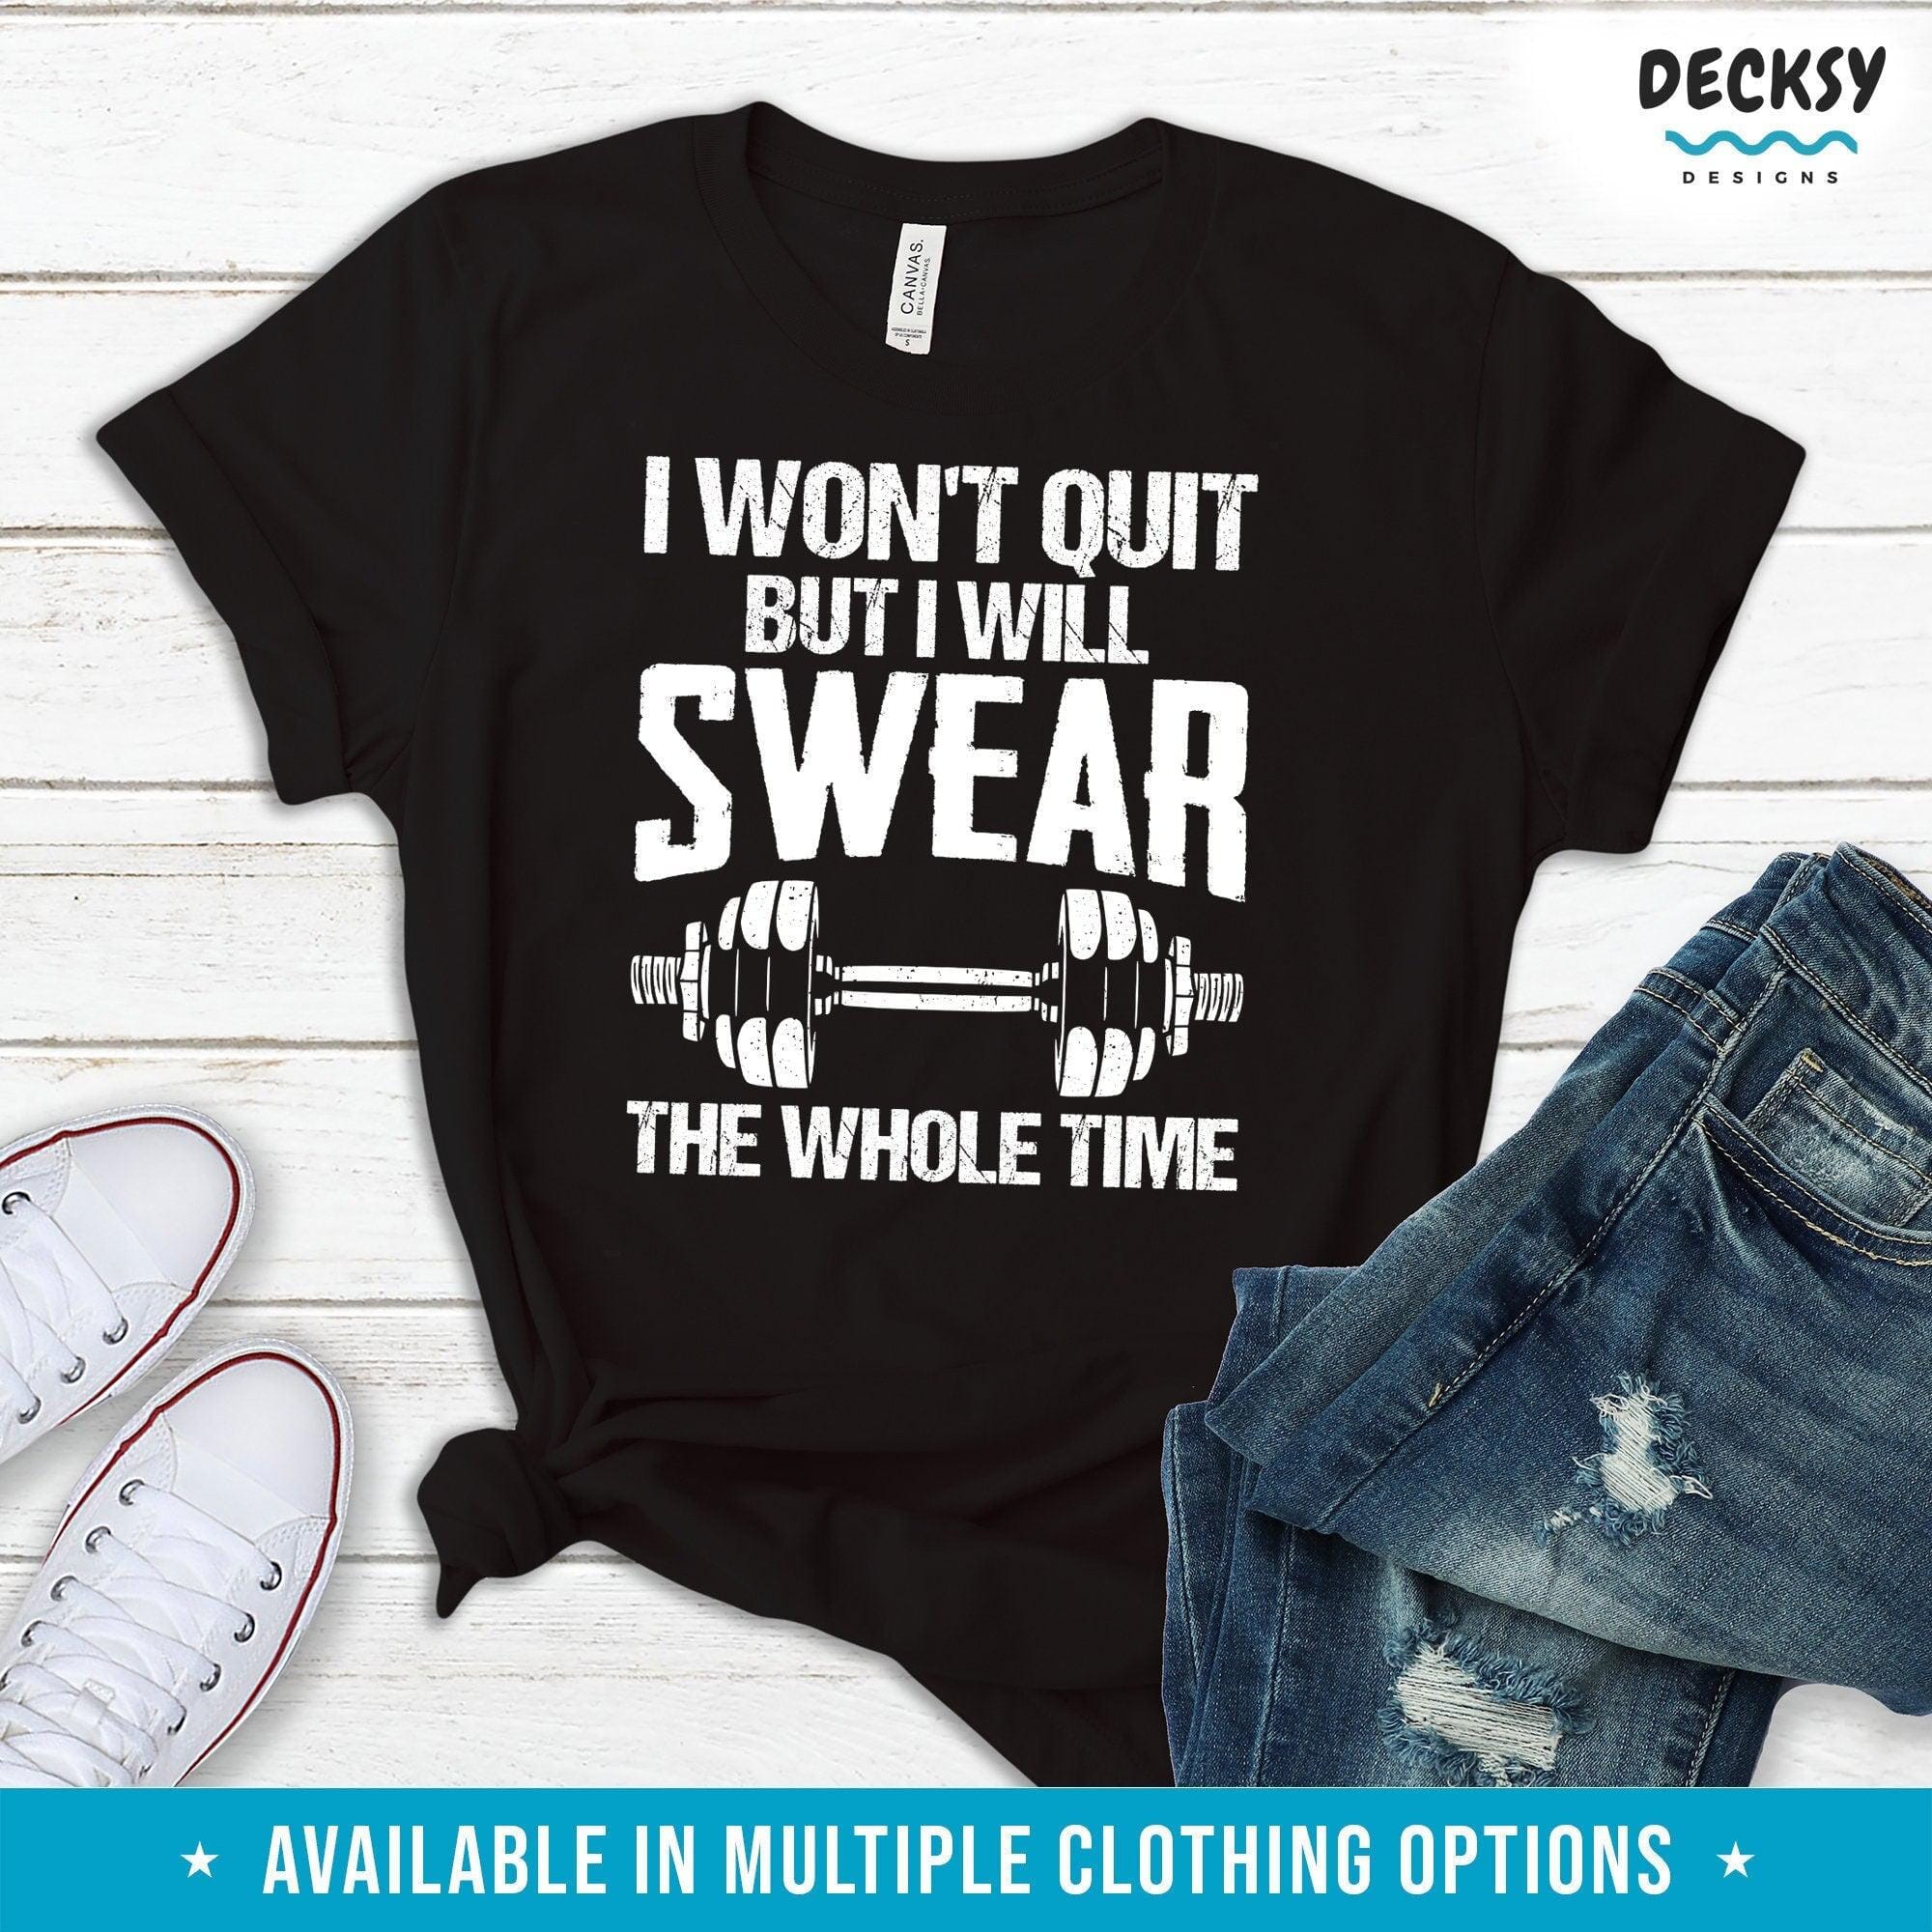 Gym Motivation Tshirt, Workout Gift-Clothing:Gender-Neutral Adult Clothing:Tops & Tees:T-shirts:Graphic Tees-DecksyDesigns